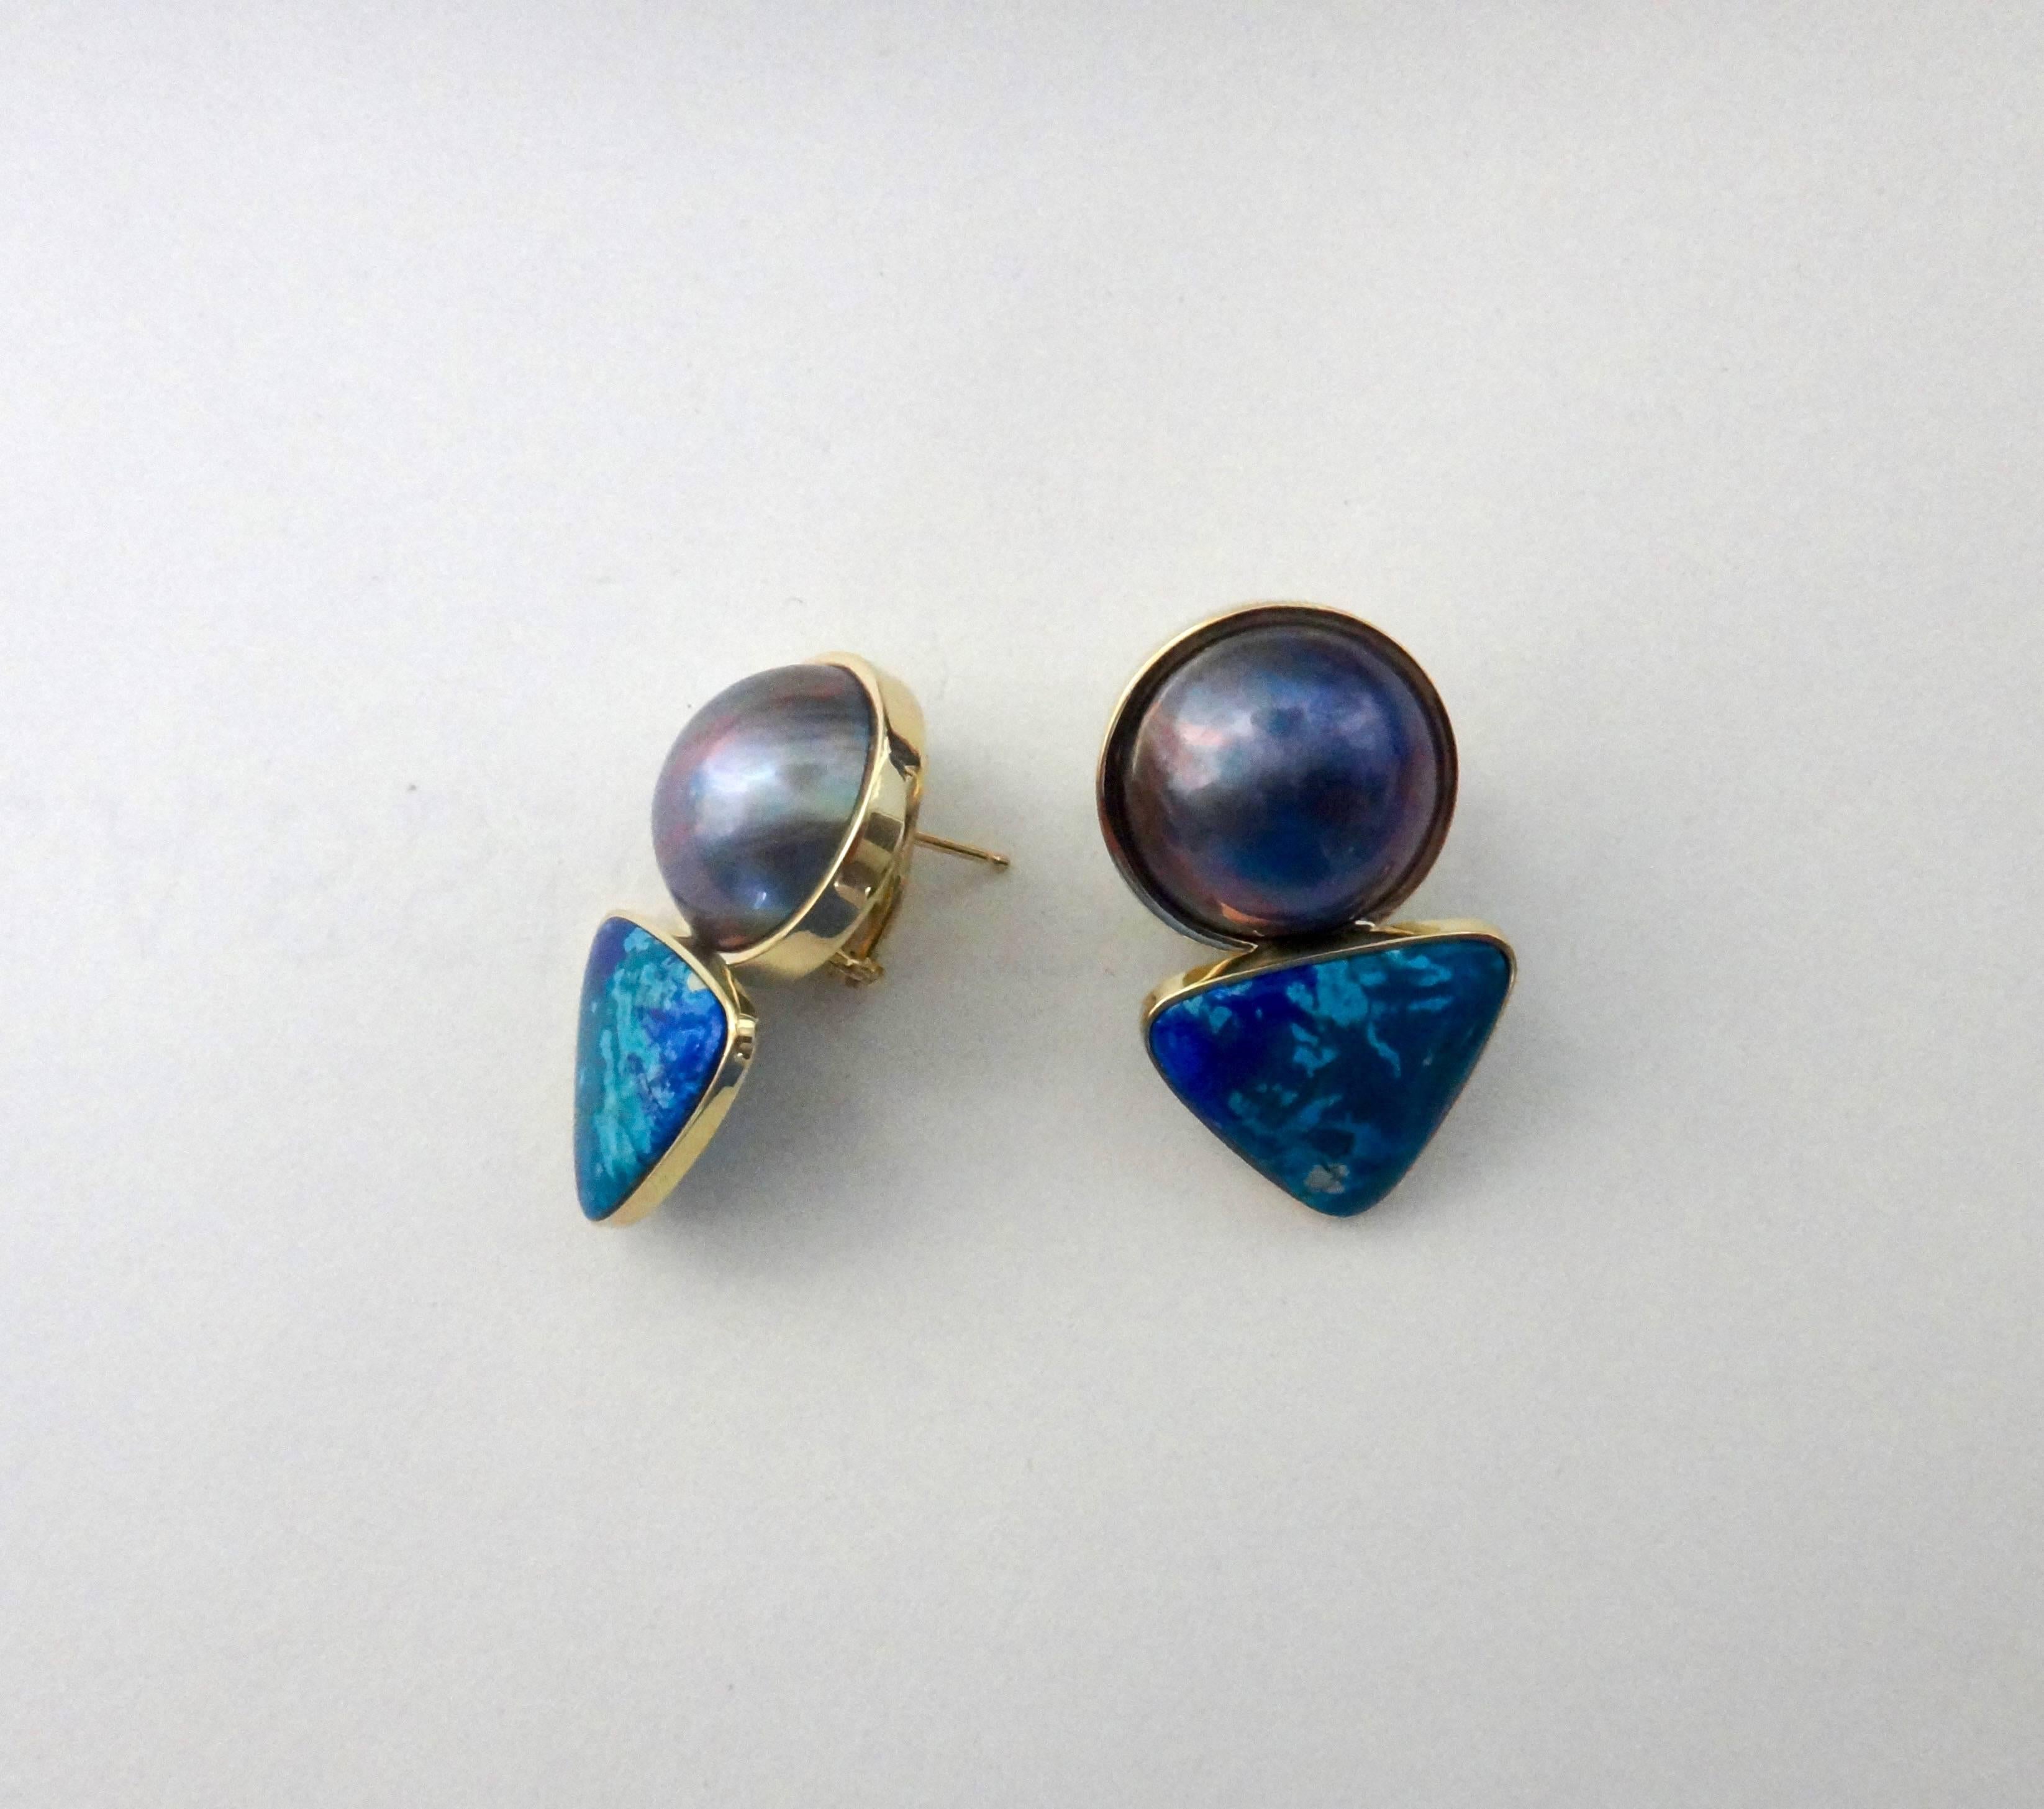 Huge (18mm) gray mobe pearls reflecting a rainbow of colors are paired with cabochons of azurite in chrysocolla in these daring earrings.  The gems are set in handmade 18k yellow gold mountings and come with posts and omega clip backs for comfort